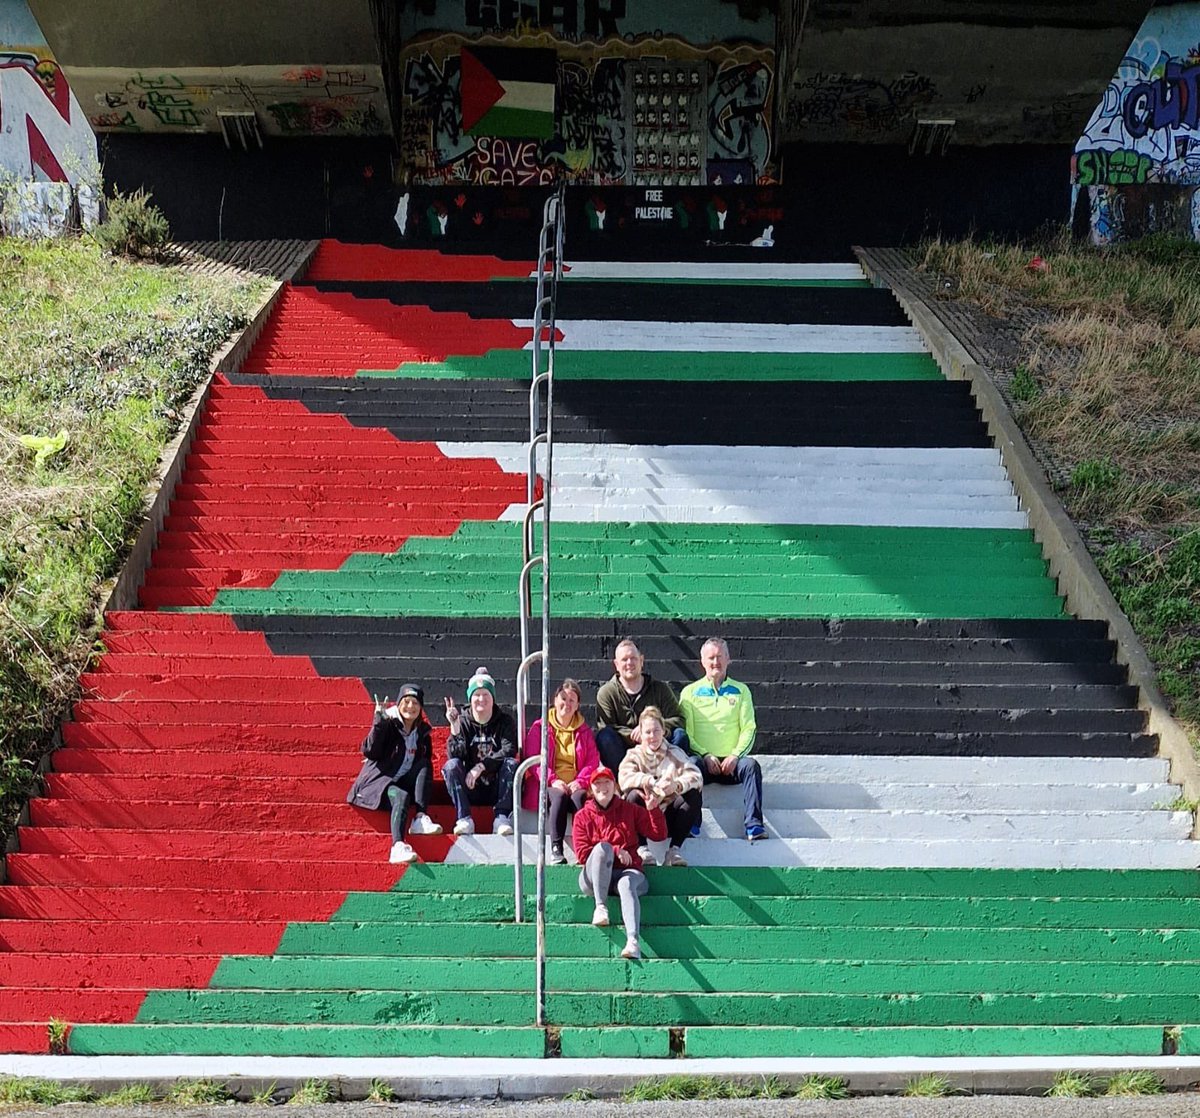 Activists paint the steps underneath Foyle Bridge in Derry, Ireland, with the colors of the flag of Palestine in an expression of solidarity with the Palestinian people amid the ongoing Israeli genocide.